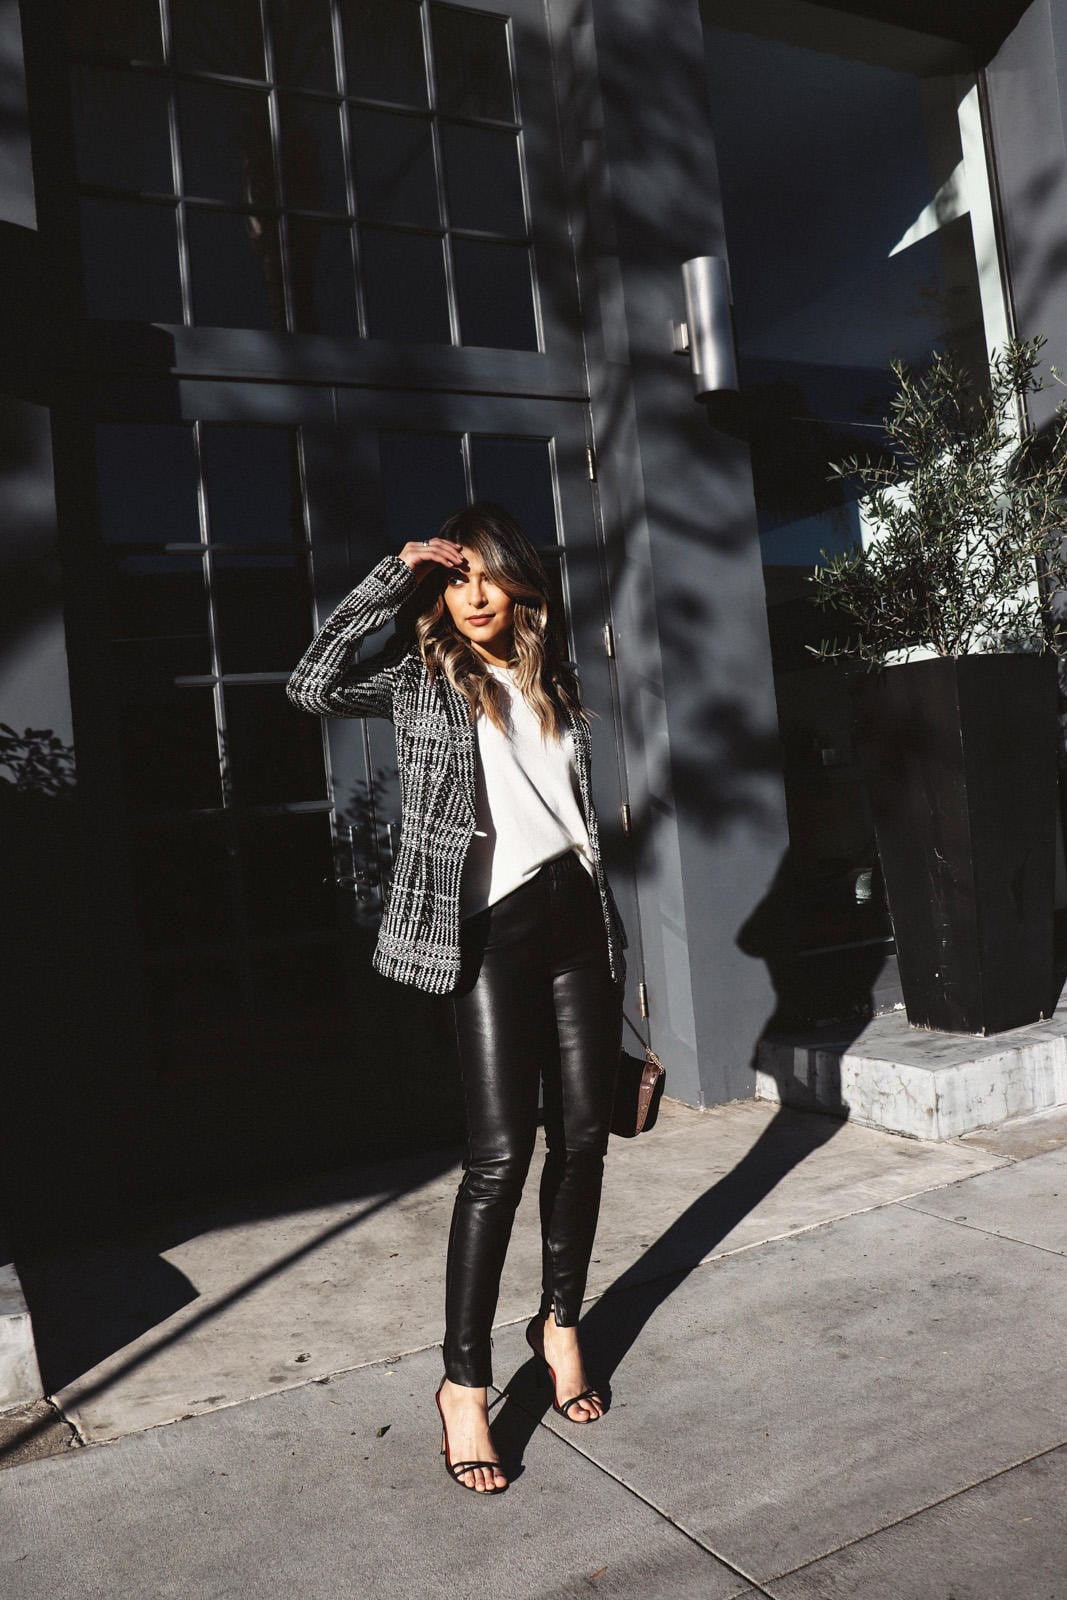 St Johns Blazer, leather pants, heels, spring outfit